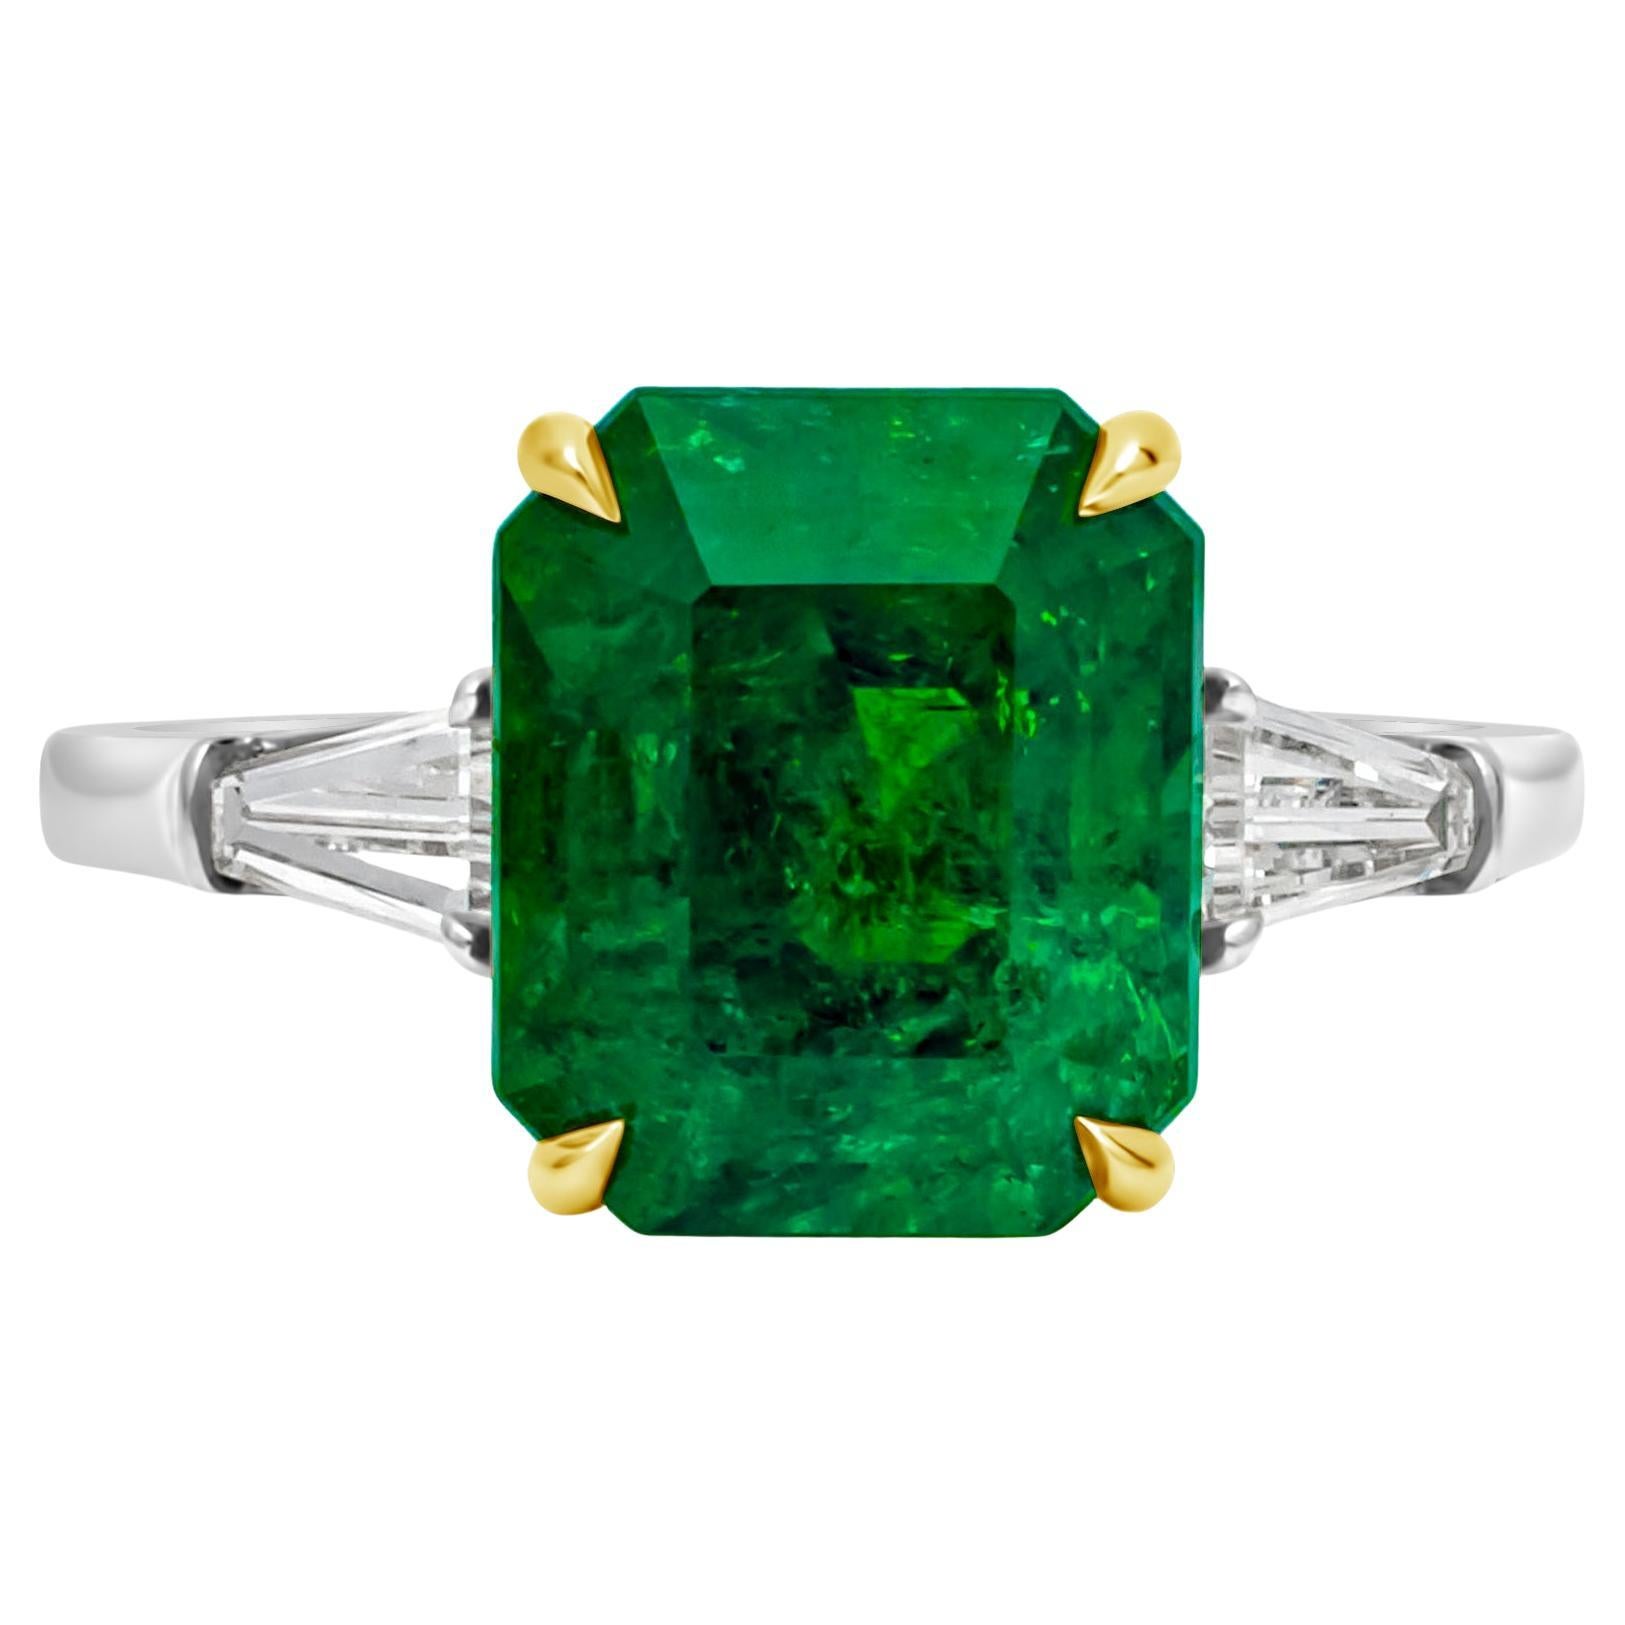 3.84 Carats Emerald Cut Colombian Emerald Three Stone Engagement Ring